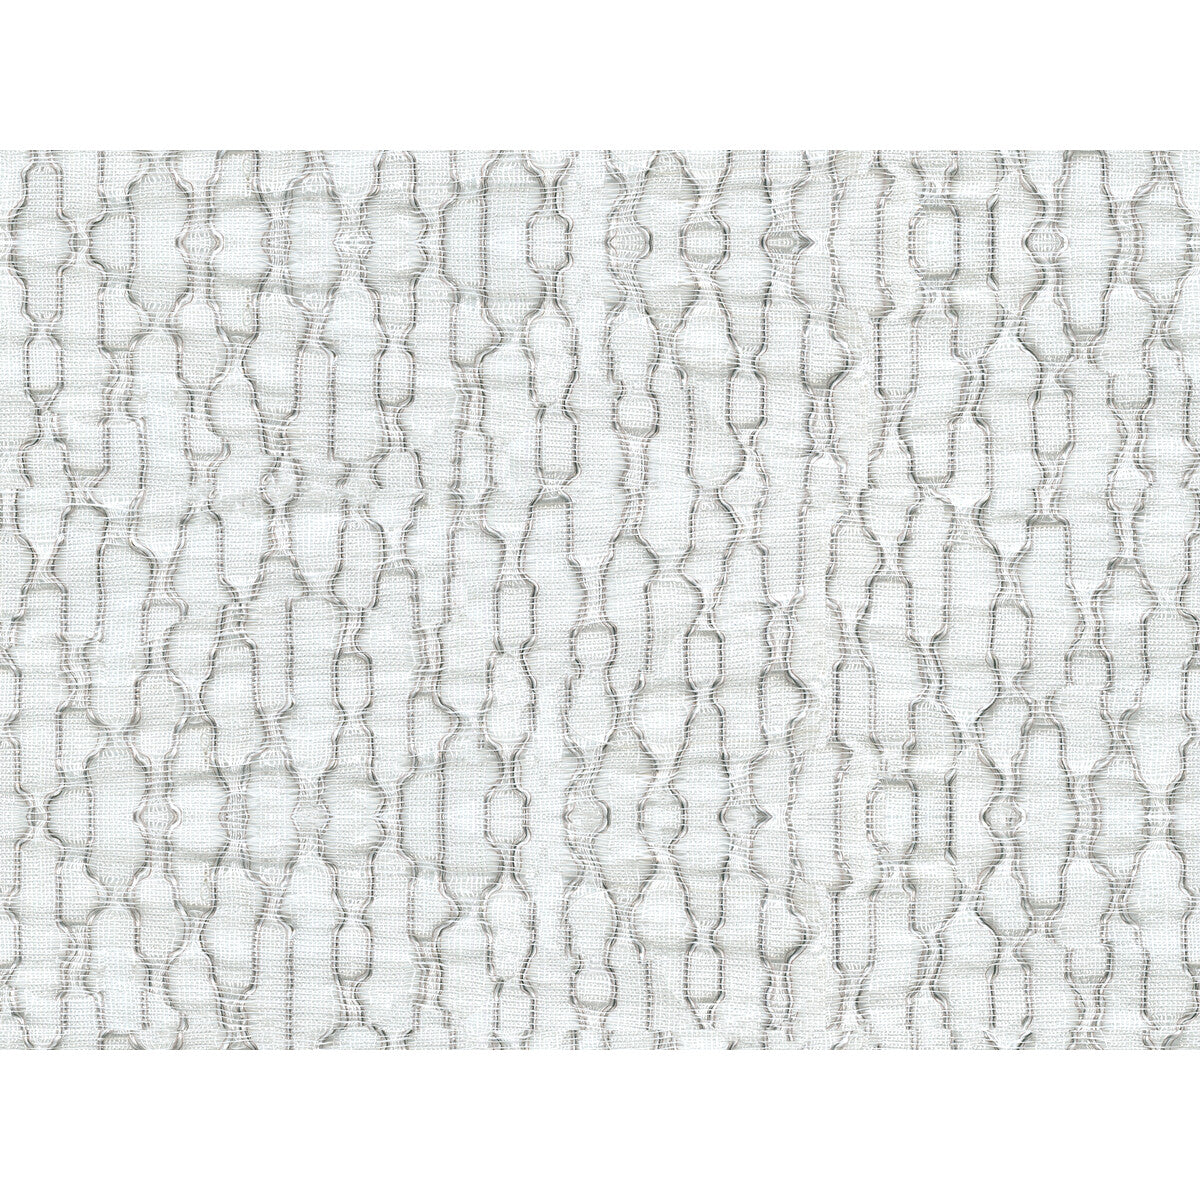 Kravet Contract fabric in 4530-11 color - pattern 4530.11.0 - by Kravet Contract